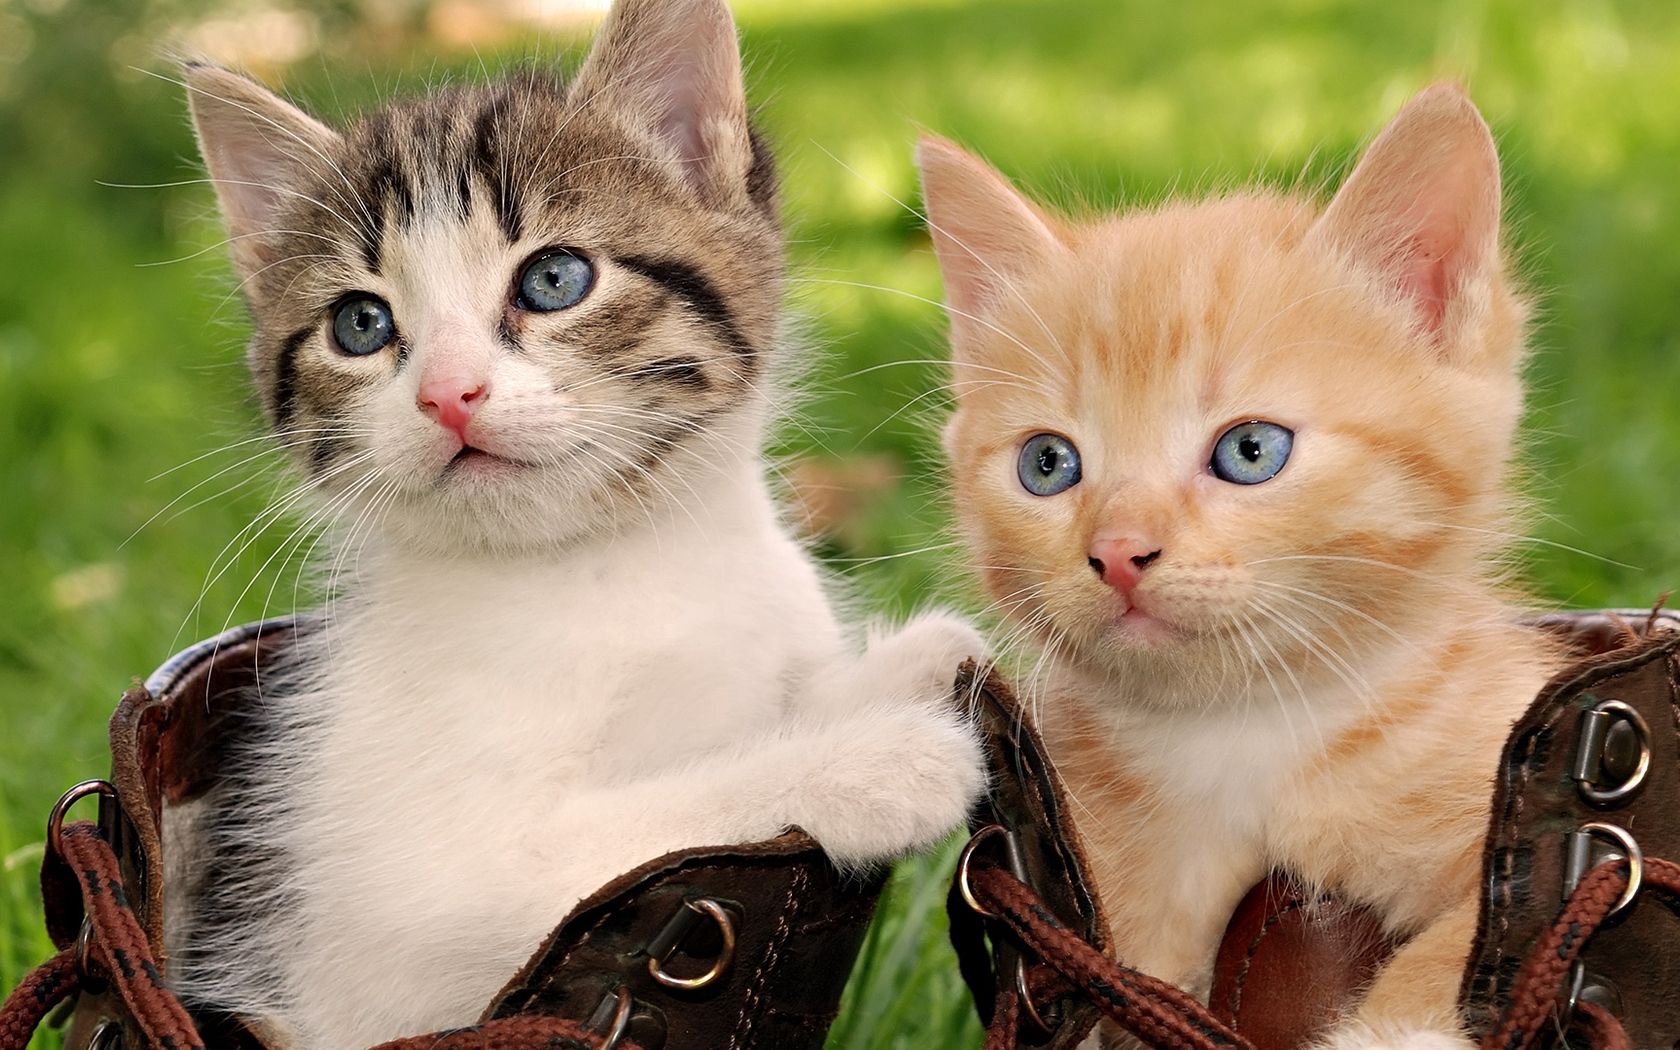 kittens, animals, sit, couple, pair, playful, boots, shoes